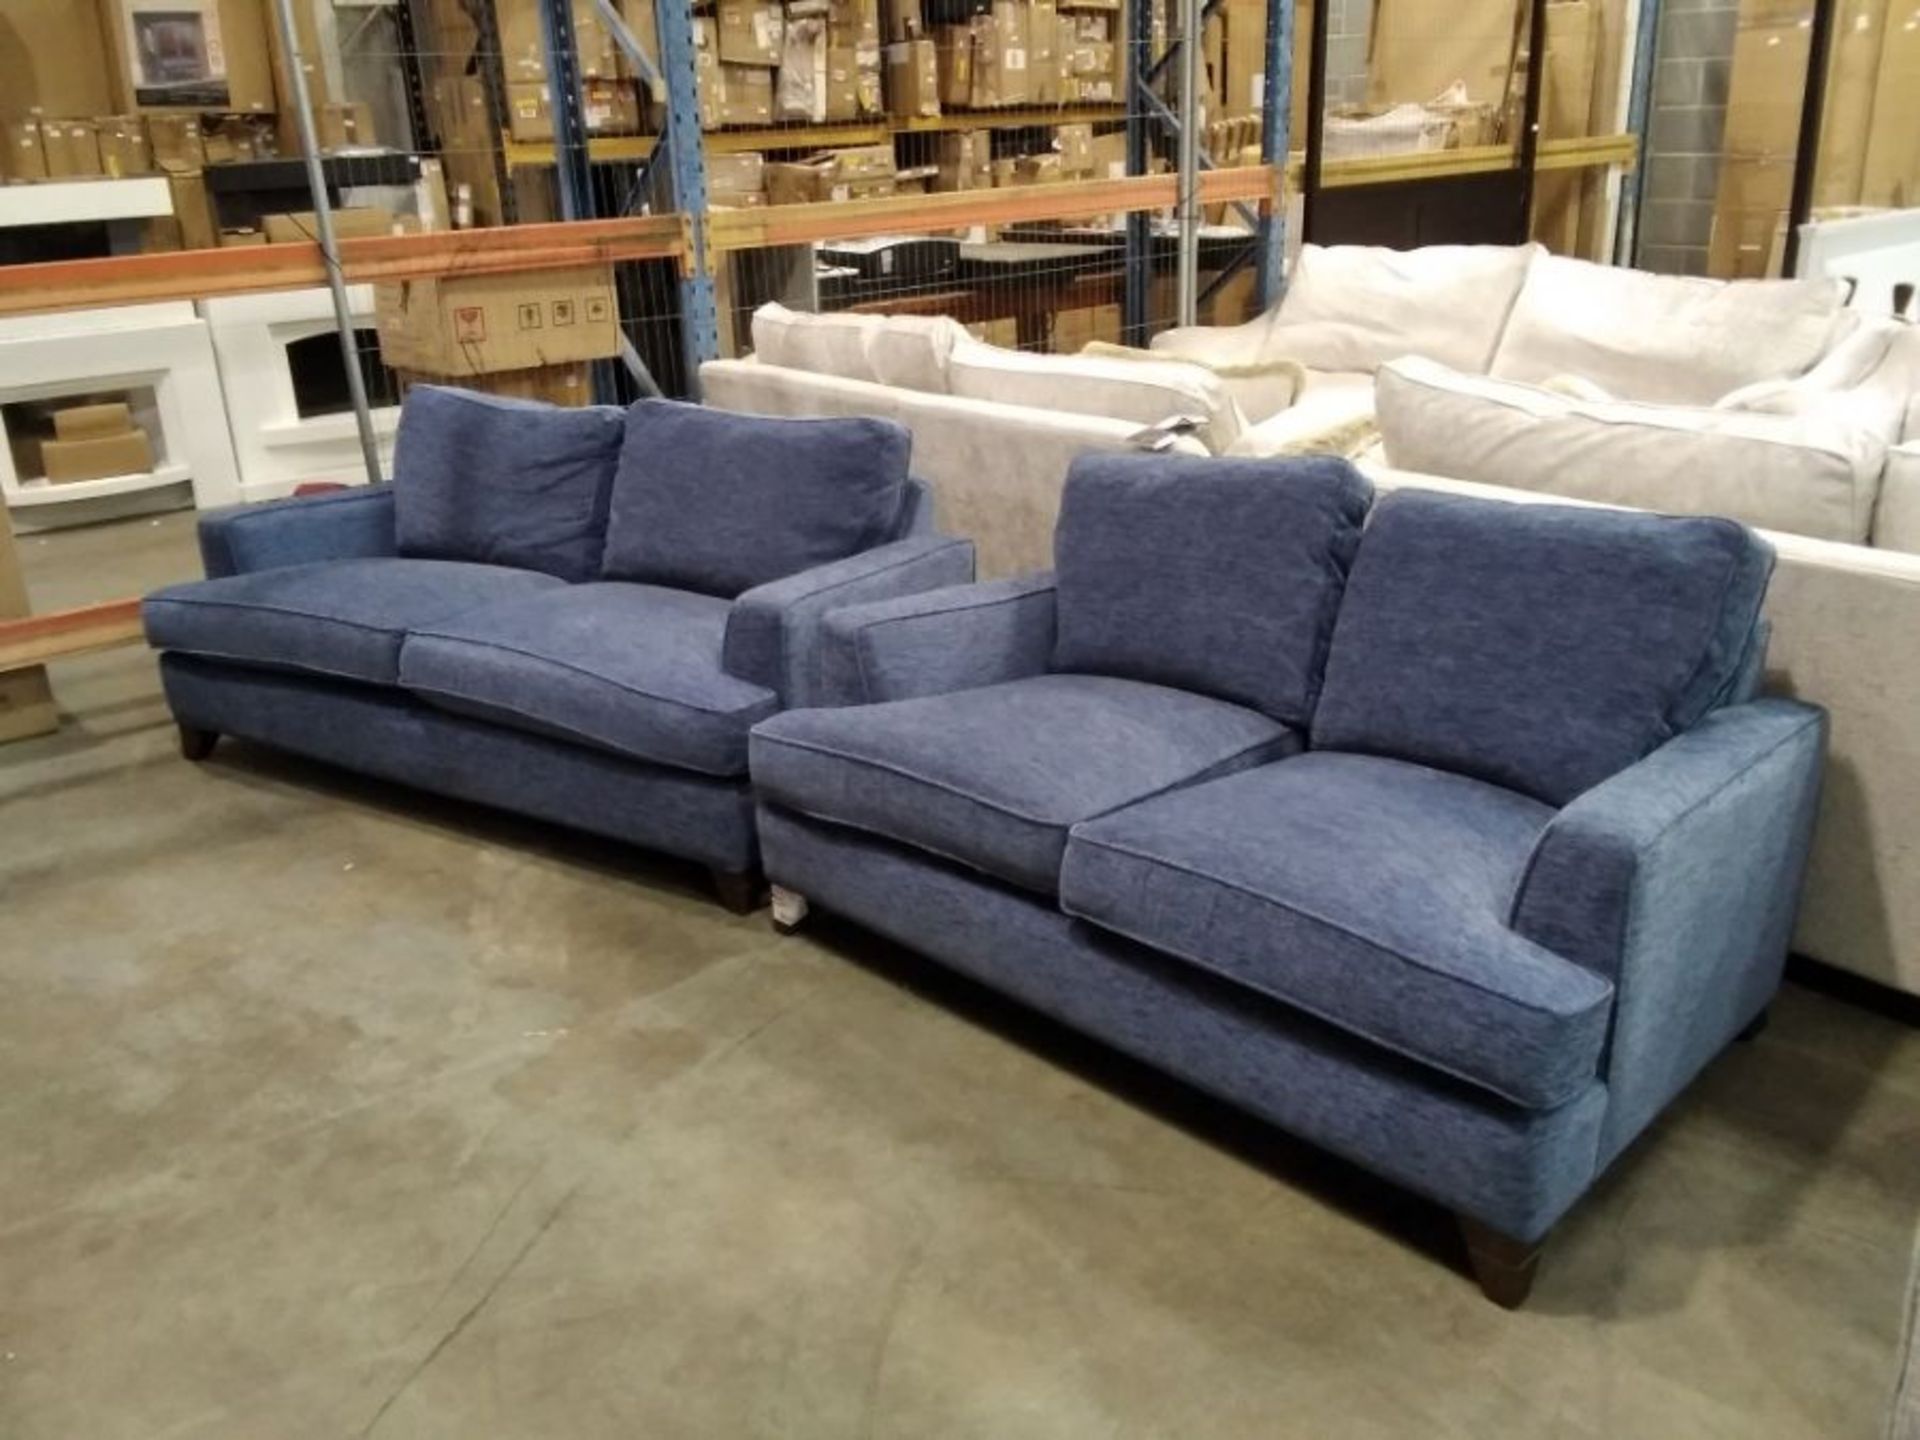 BLUE FABRIC 3 SEATER AND 2 SEATER SOFA (DAMAGED) (TROO2890-WO1227669-WO1227673)